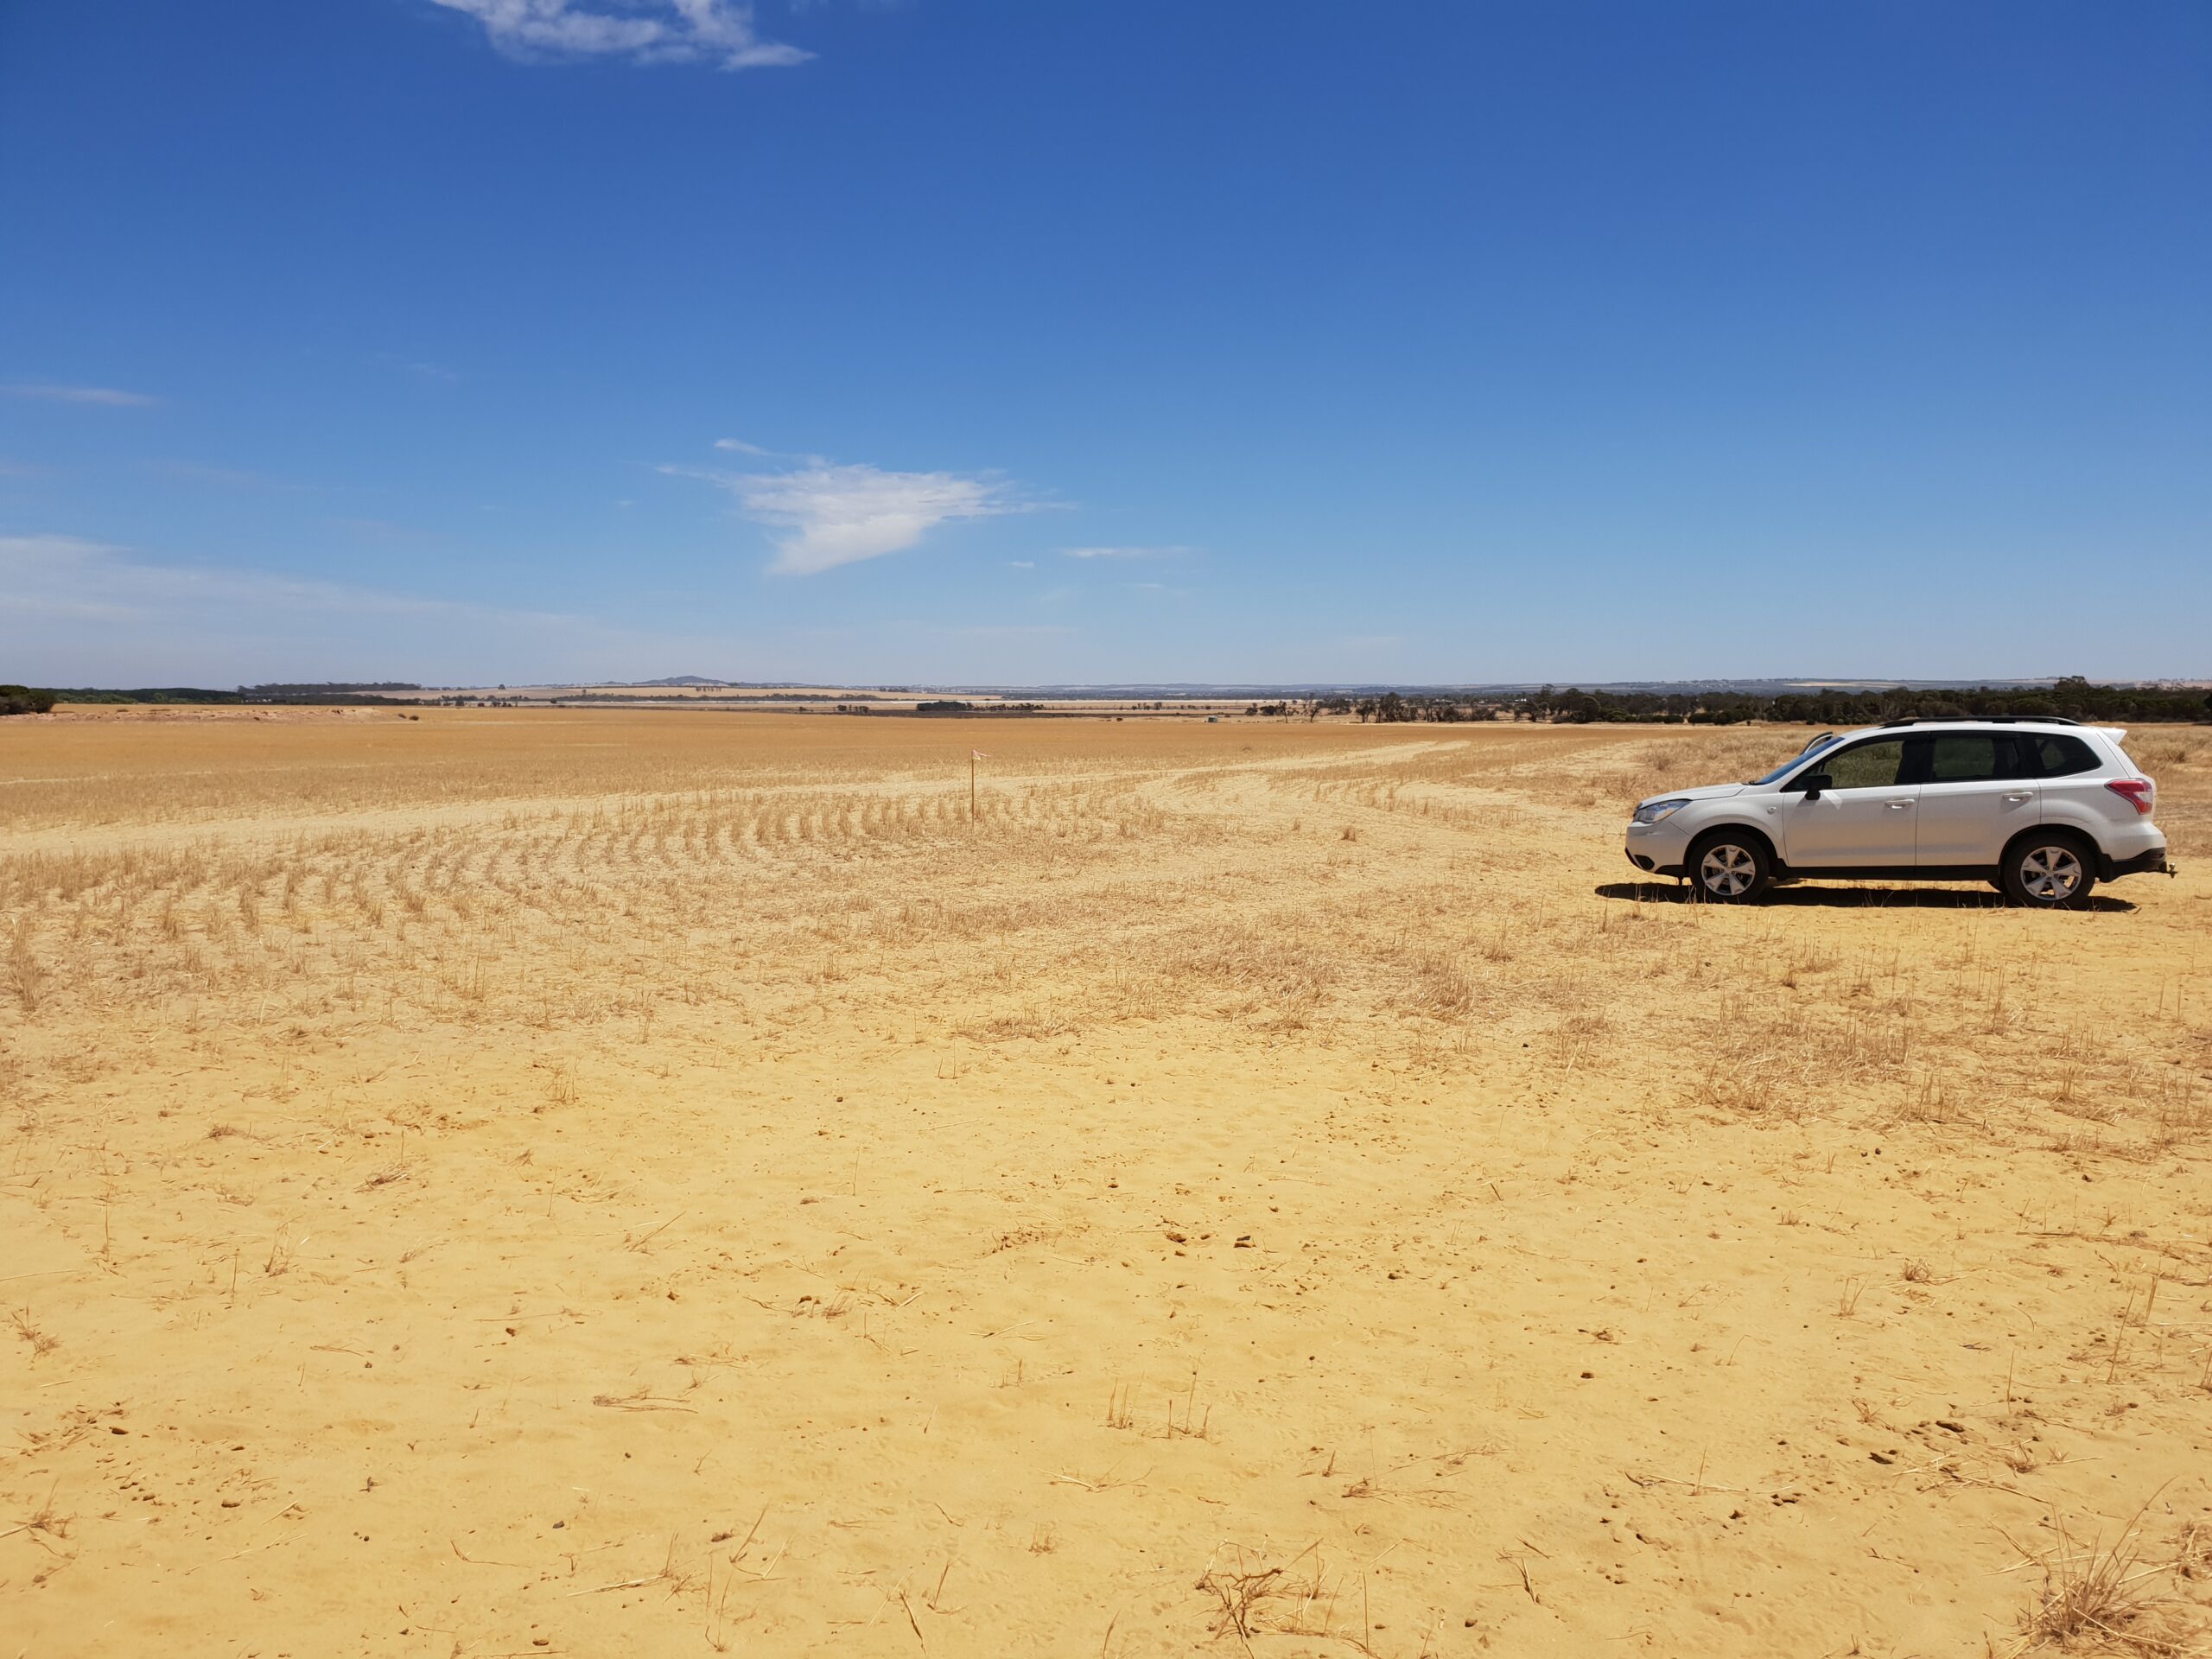 Bare paddock with yellow sand and 4x4 vehicle parked on the right hand side.